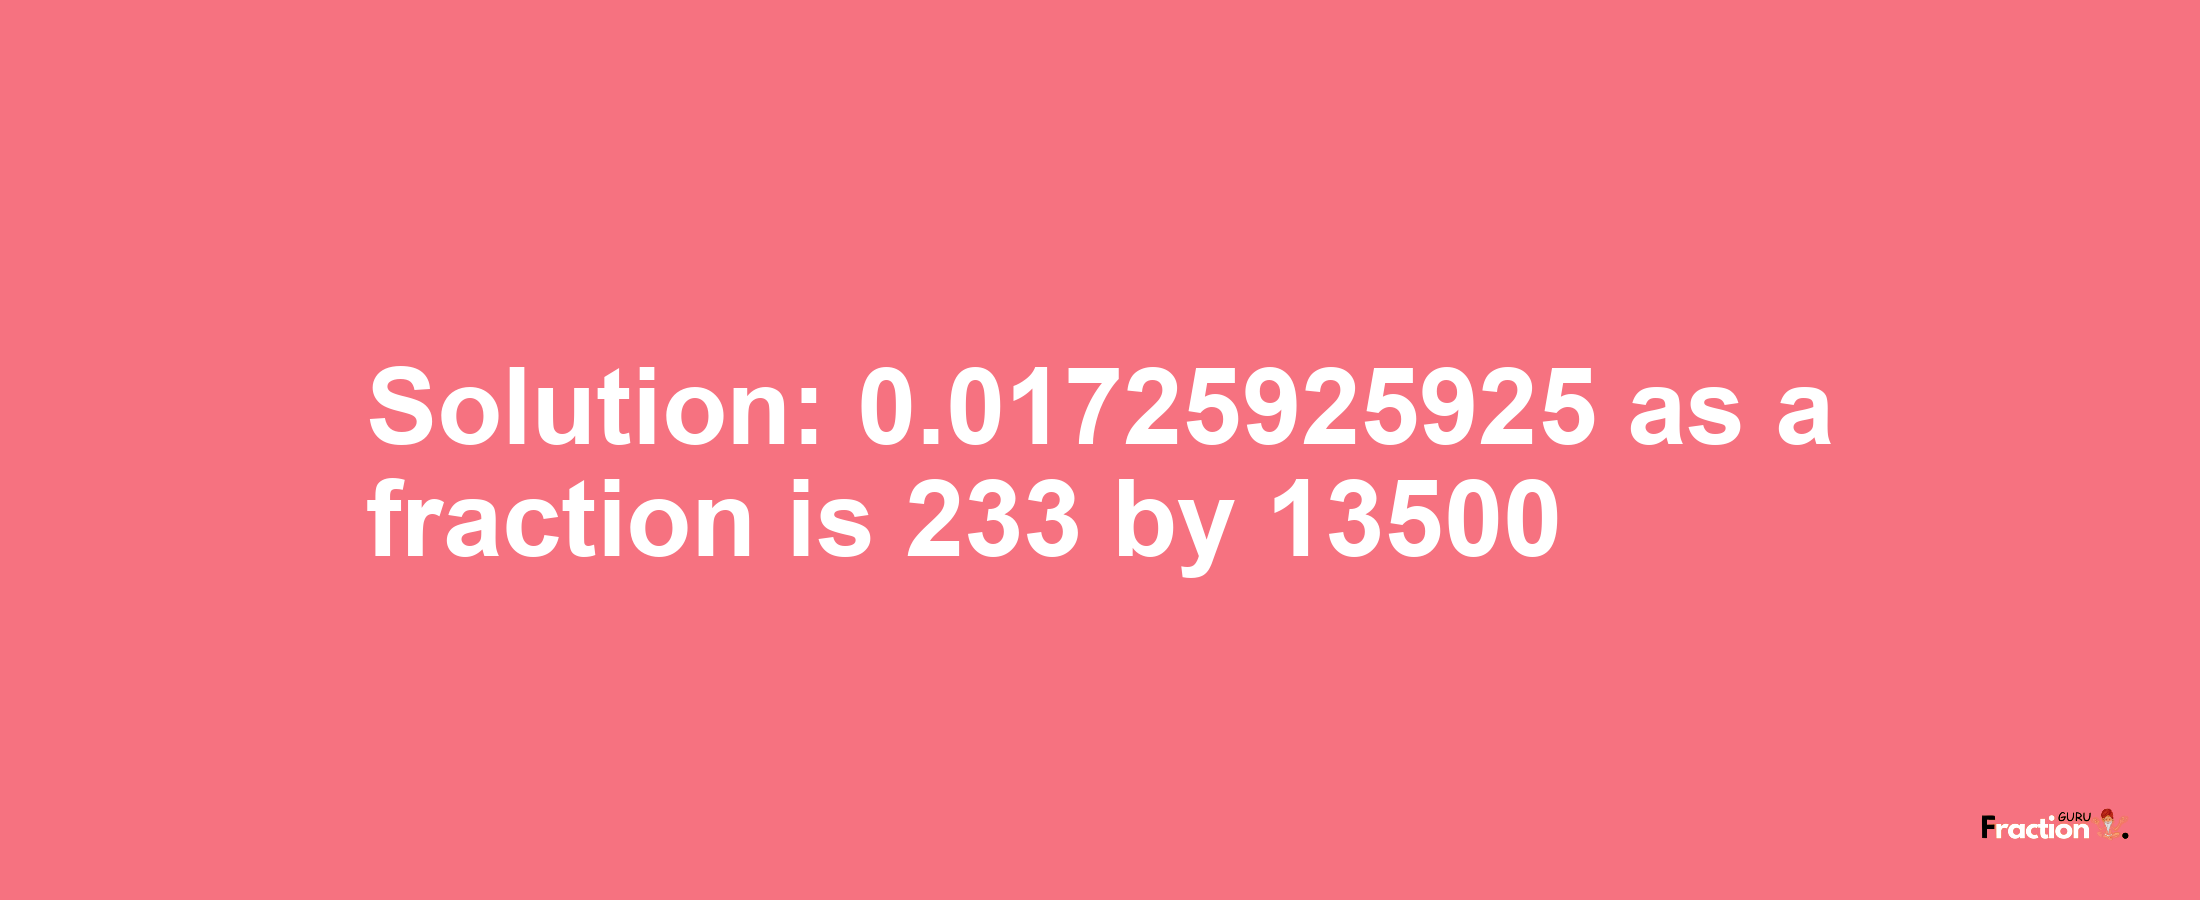 Solution:0.01725925925 as a fraction is 233/13500